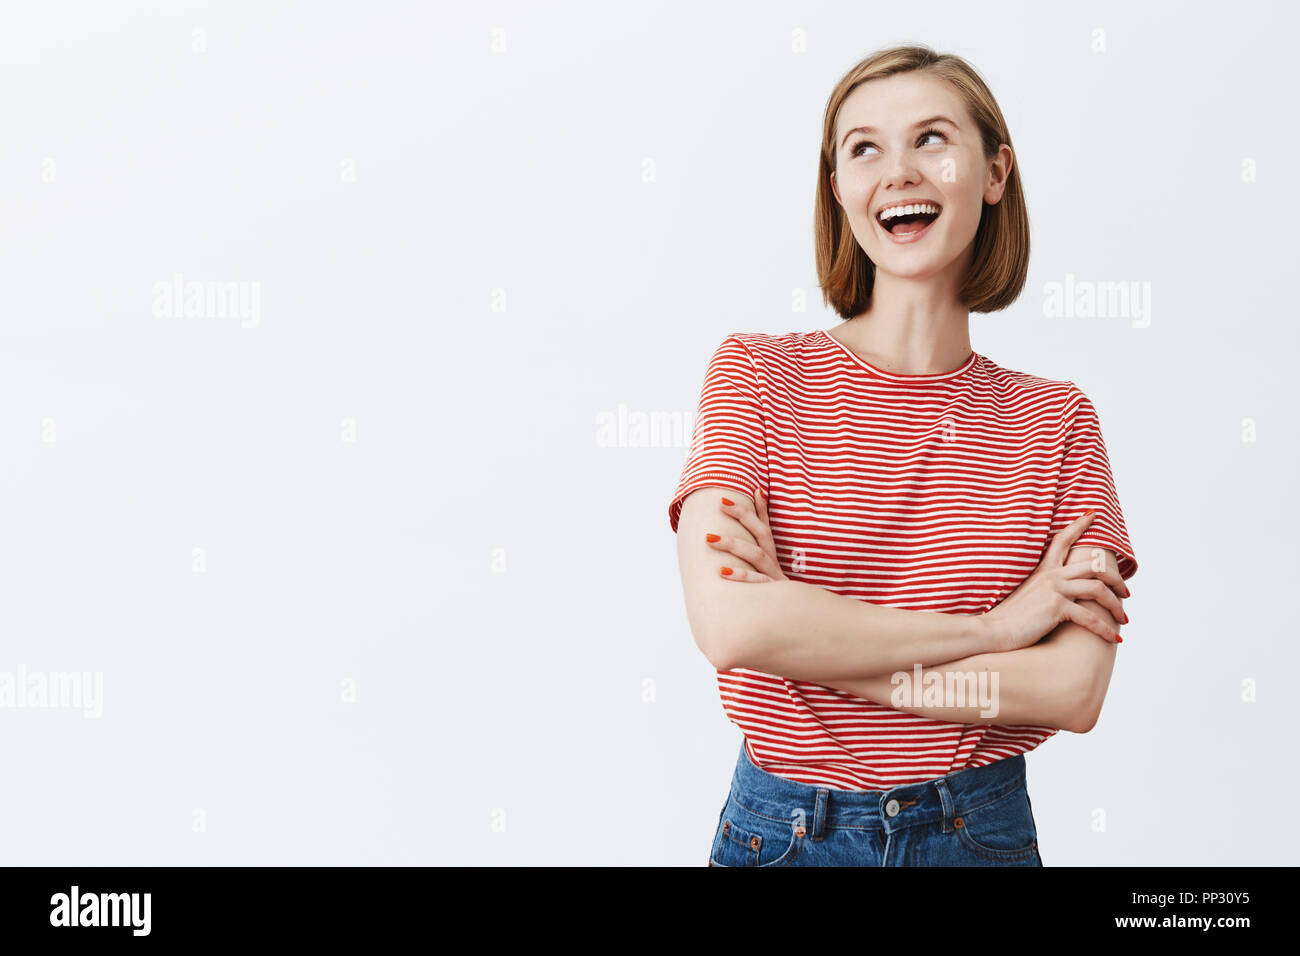 Girl laughing over dumb friend, being arrogant. Joyful triumphing self-assured female with short haircut, holding hands crossed, laughing with contempt, being top of class, showing snobbish character Stock Photo